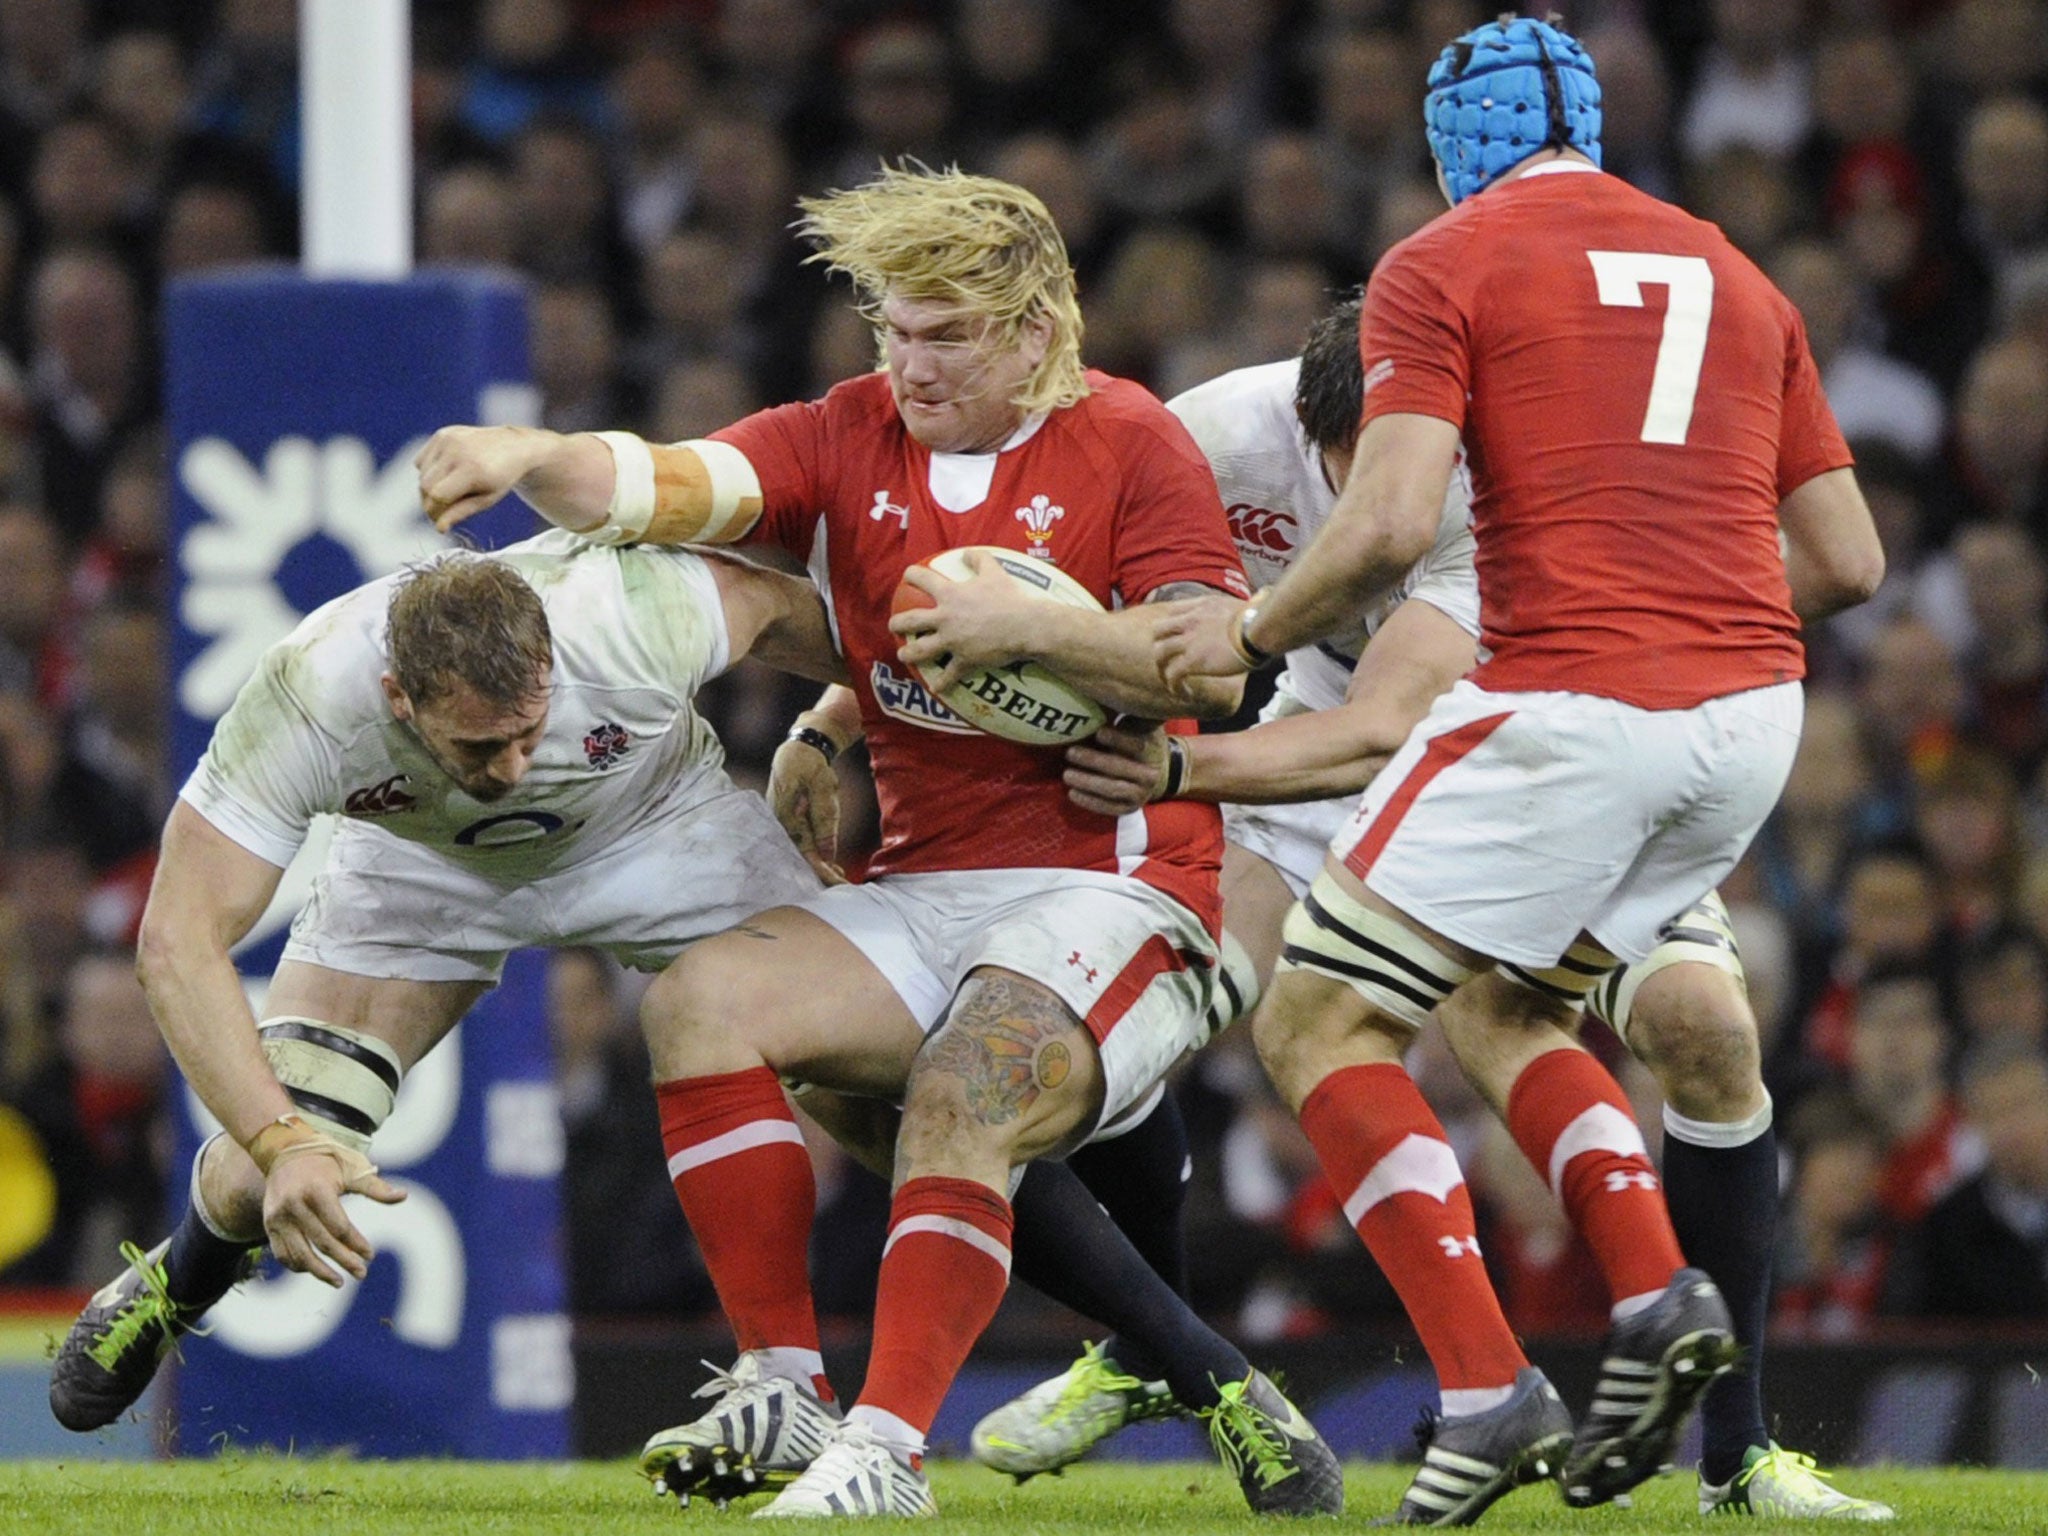 Captain crunch: Chris Robshaw (left) leads by example with a tackle on the Wales hooker Richard Hibbard